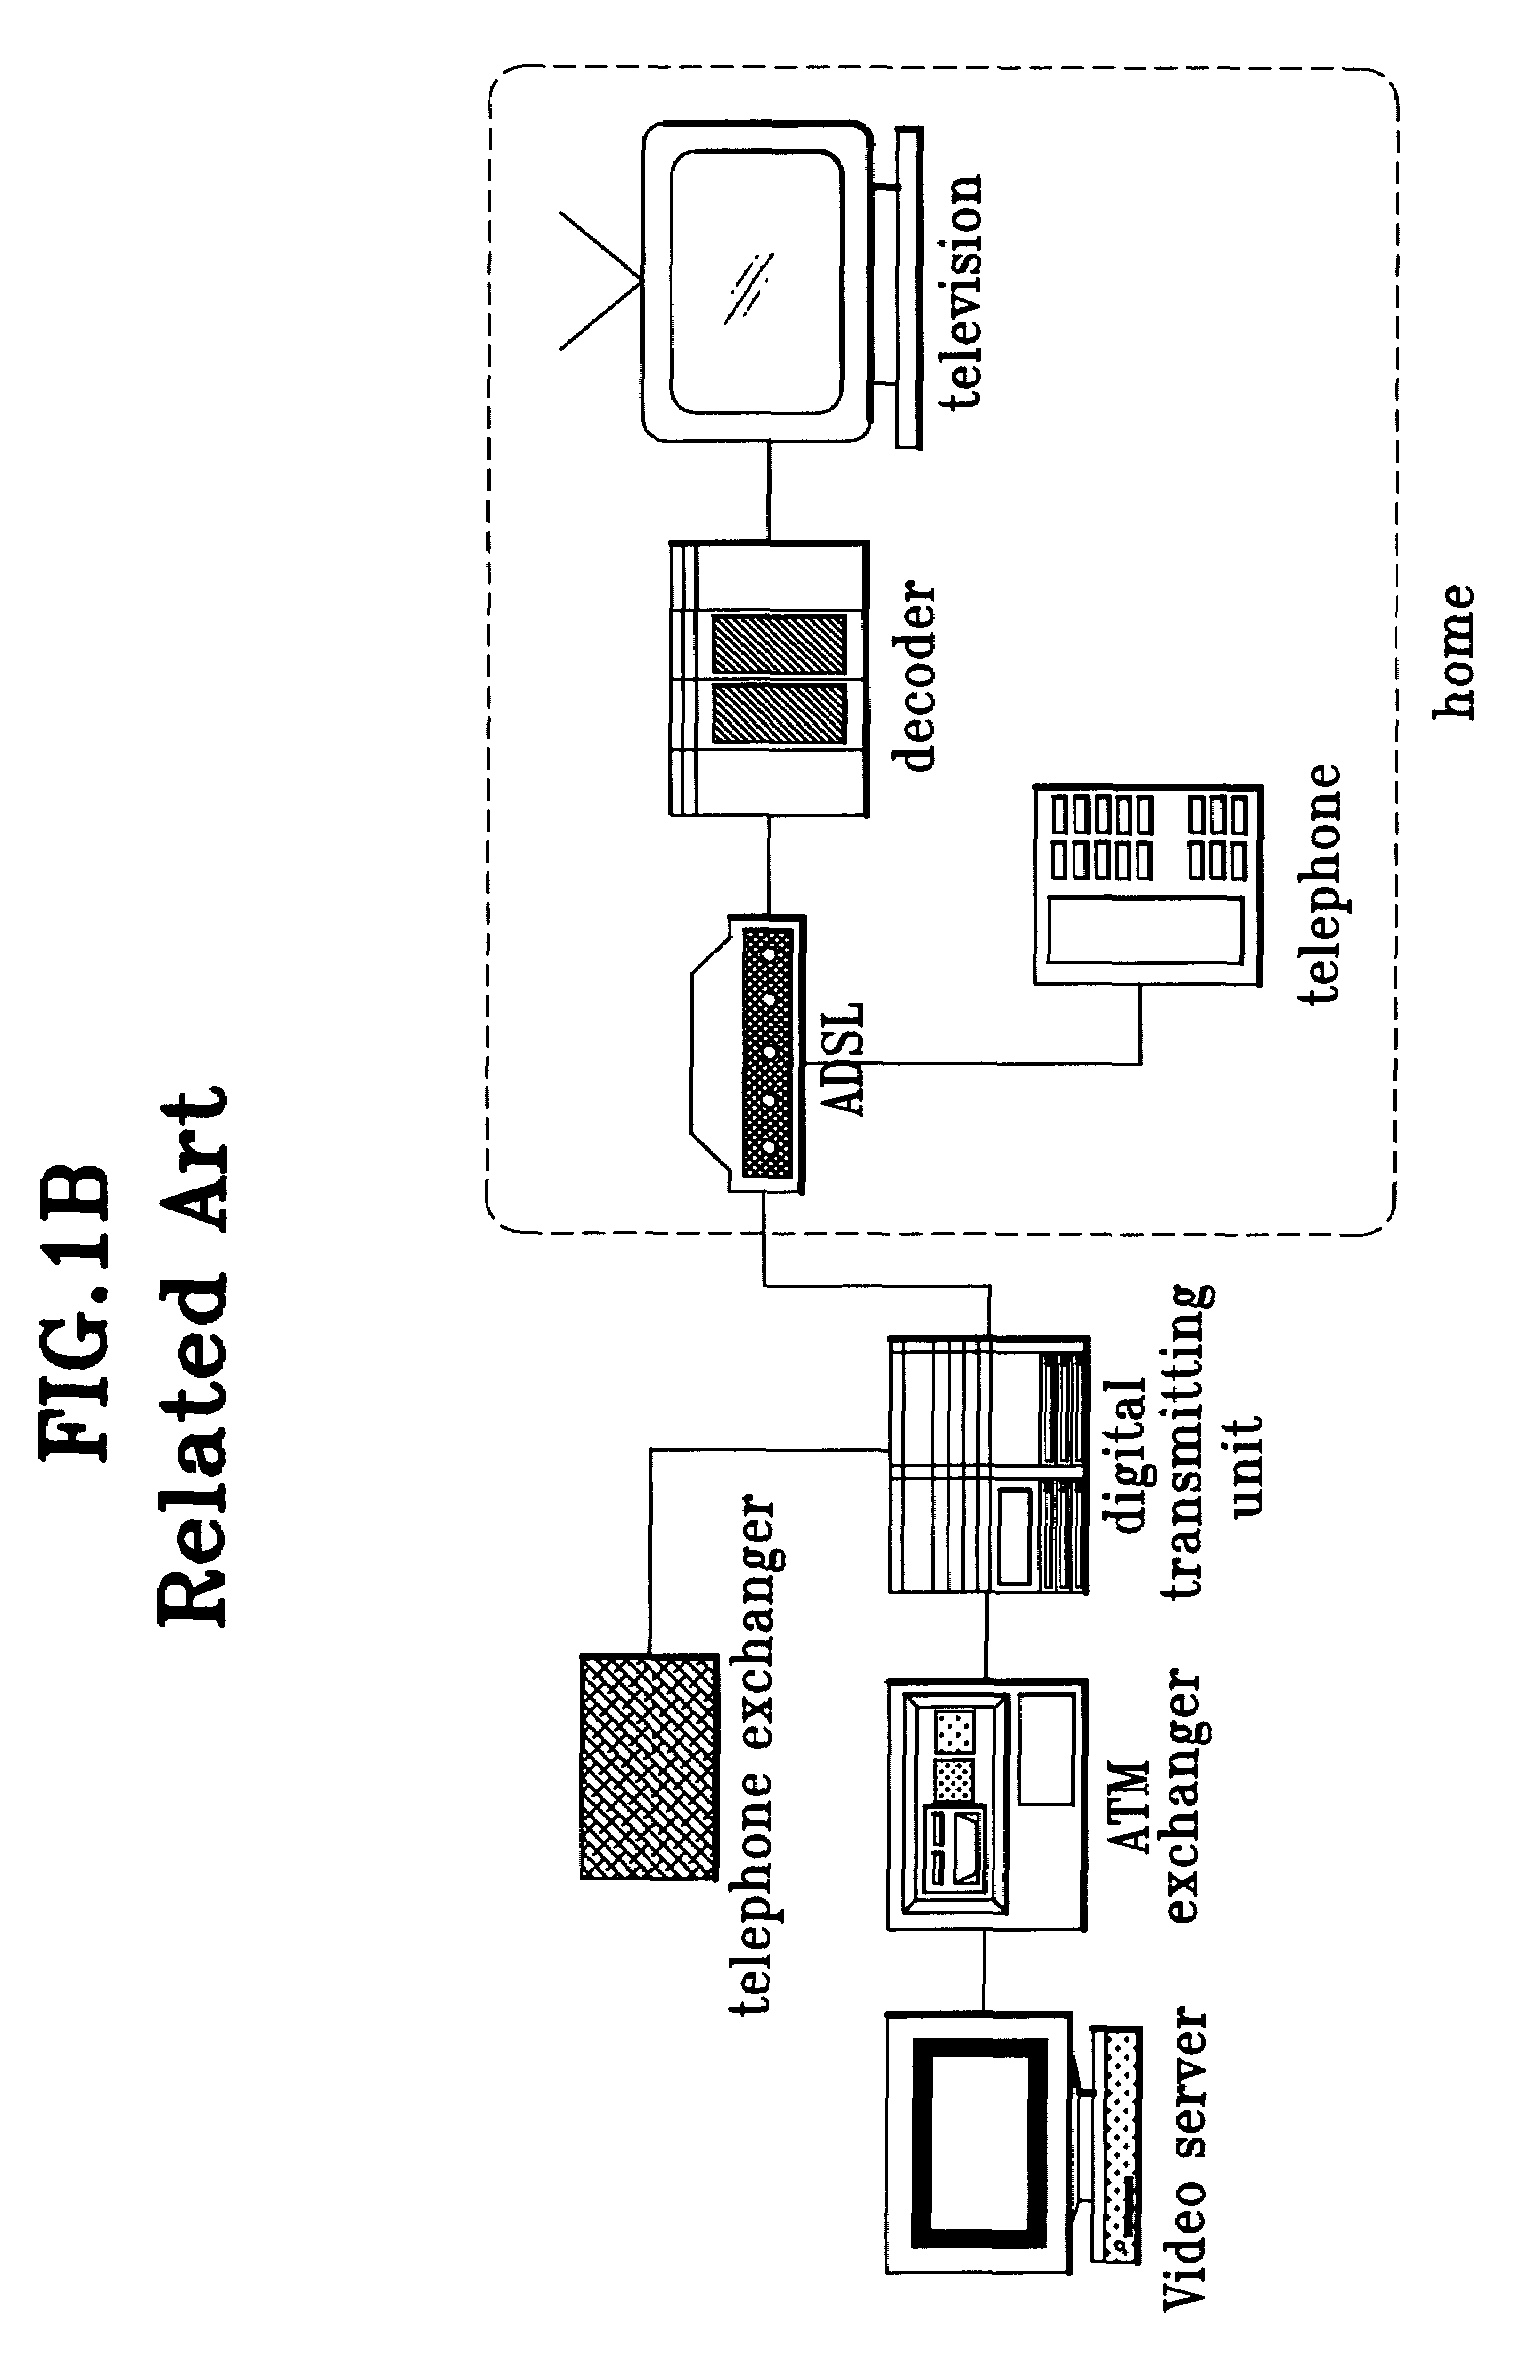 Video-on-demand system and video viewing assisting method